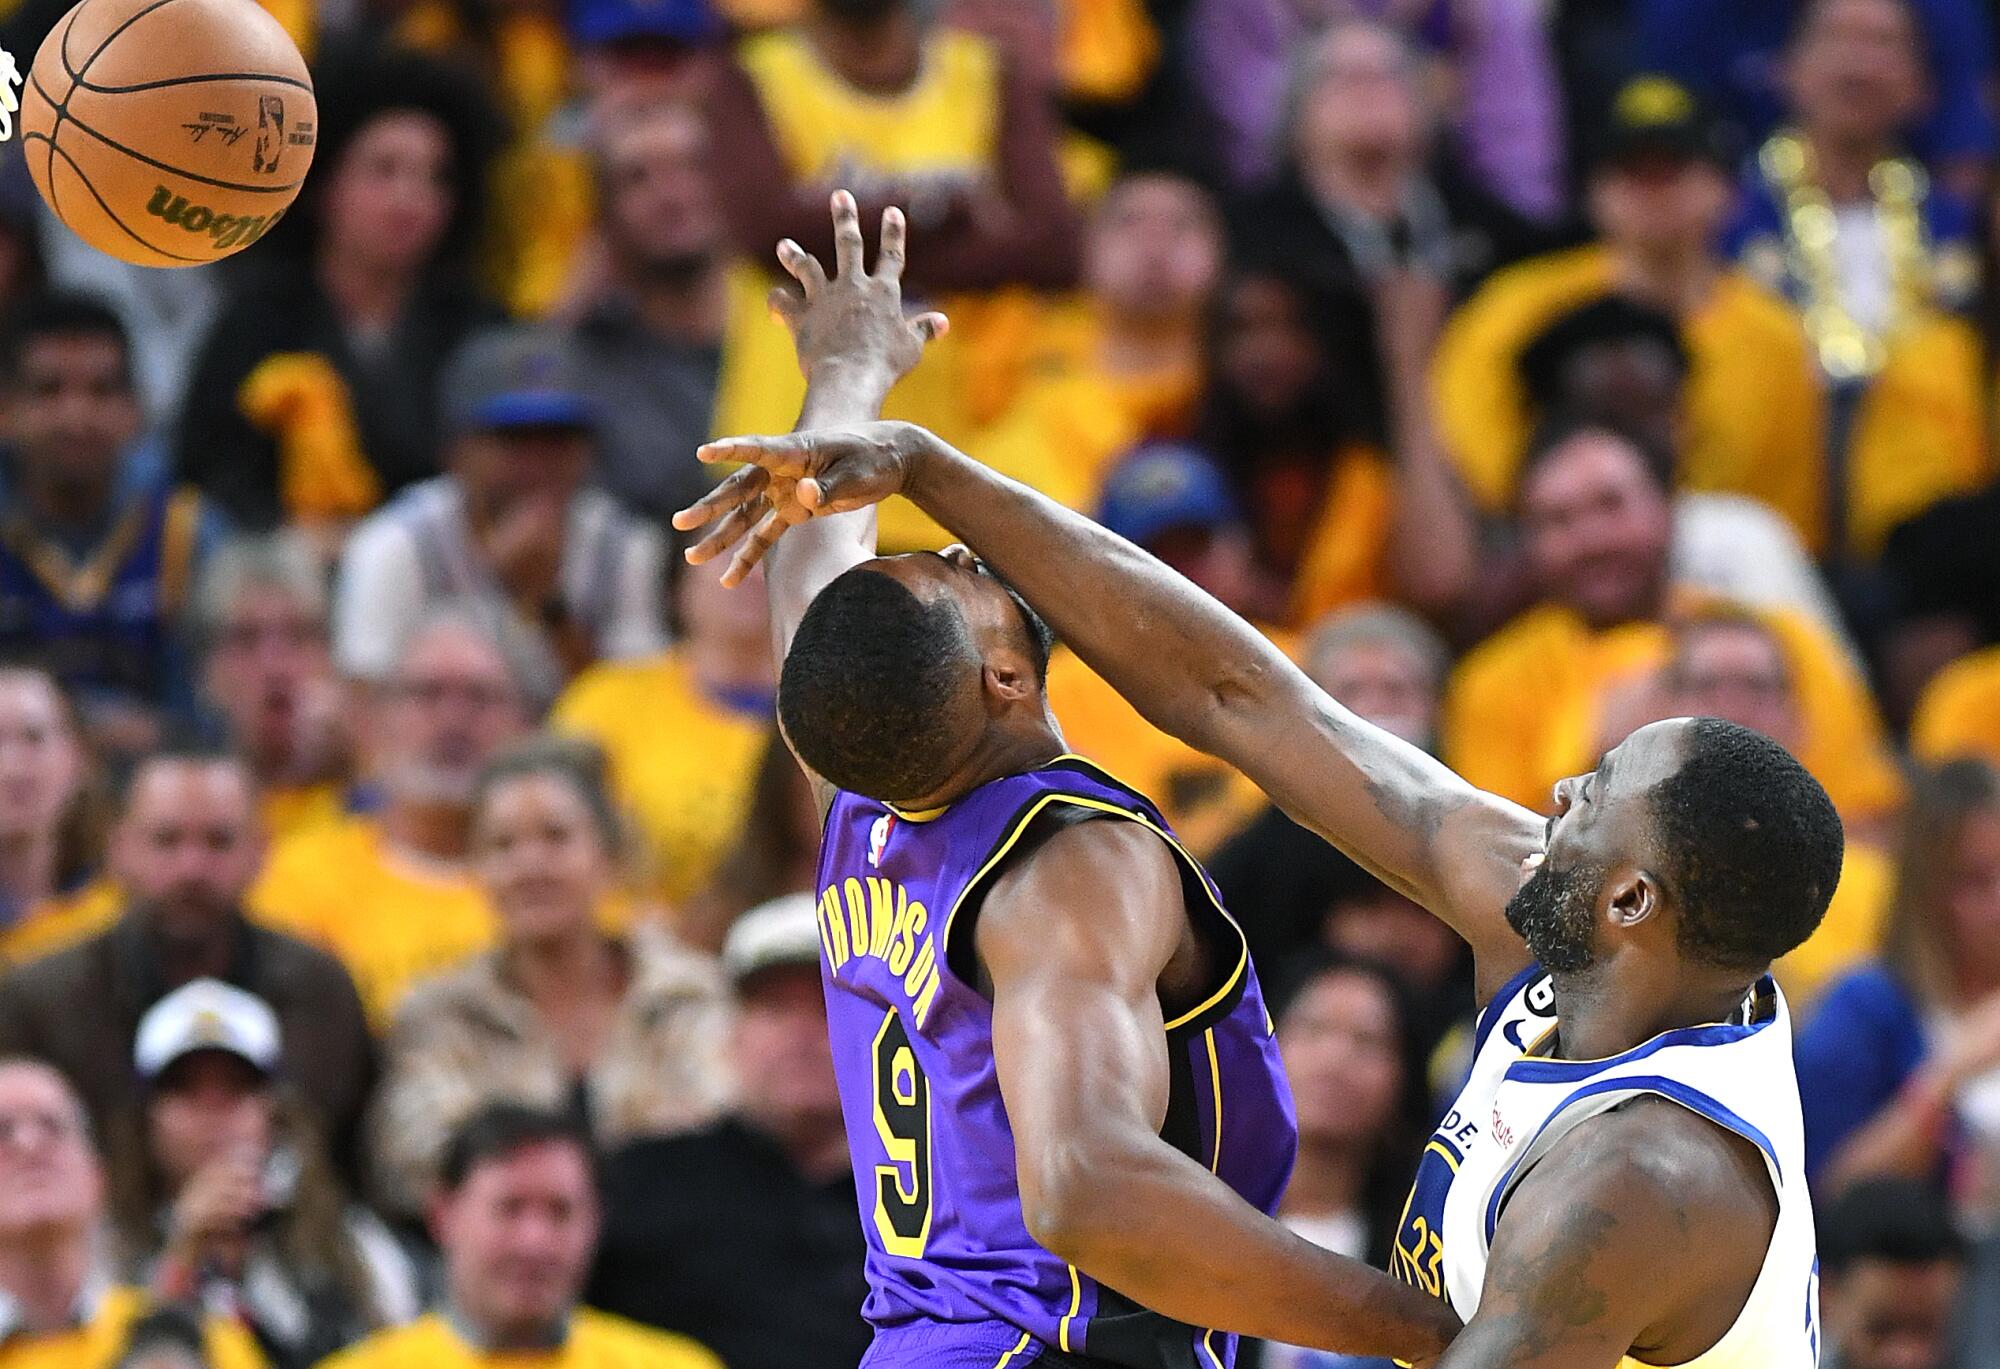 Lakers forward Tristan Thompson, left, gets hit in the face by Warriors forward Draymond Green.